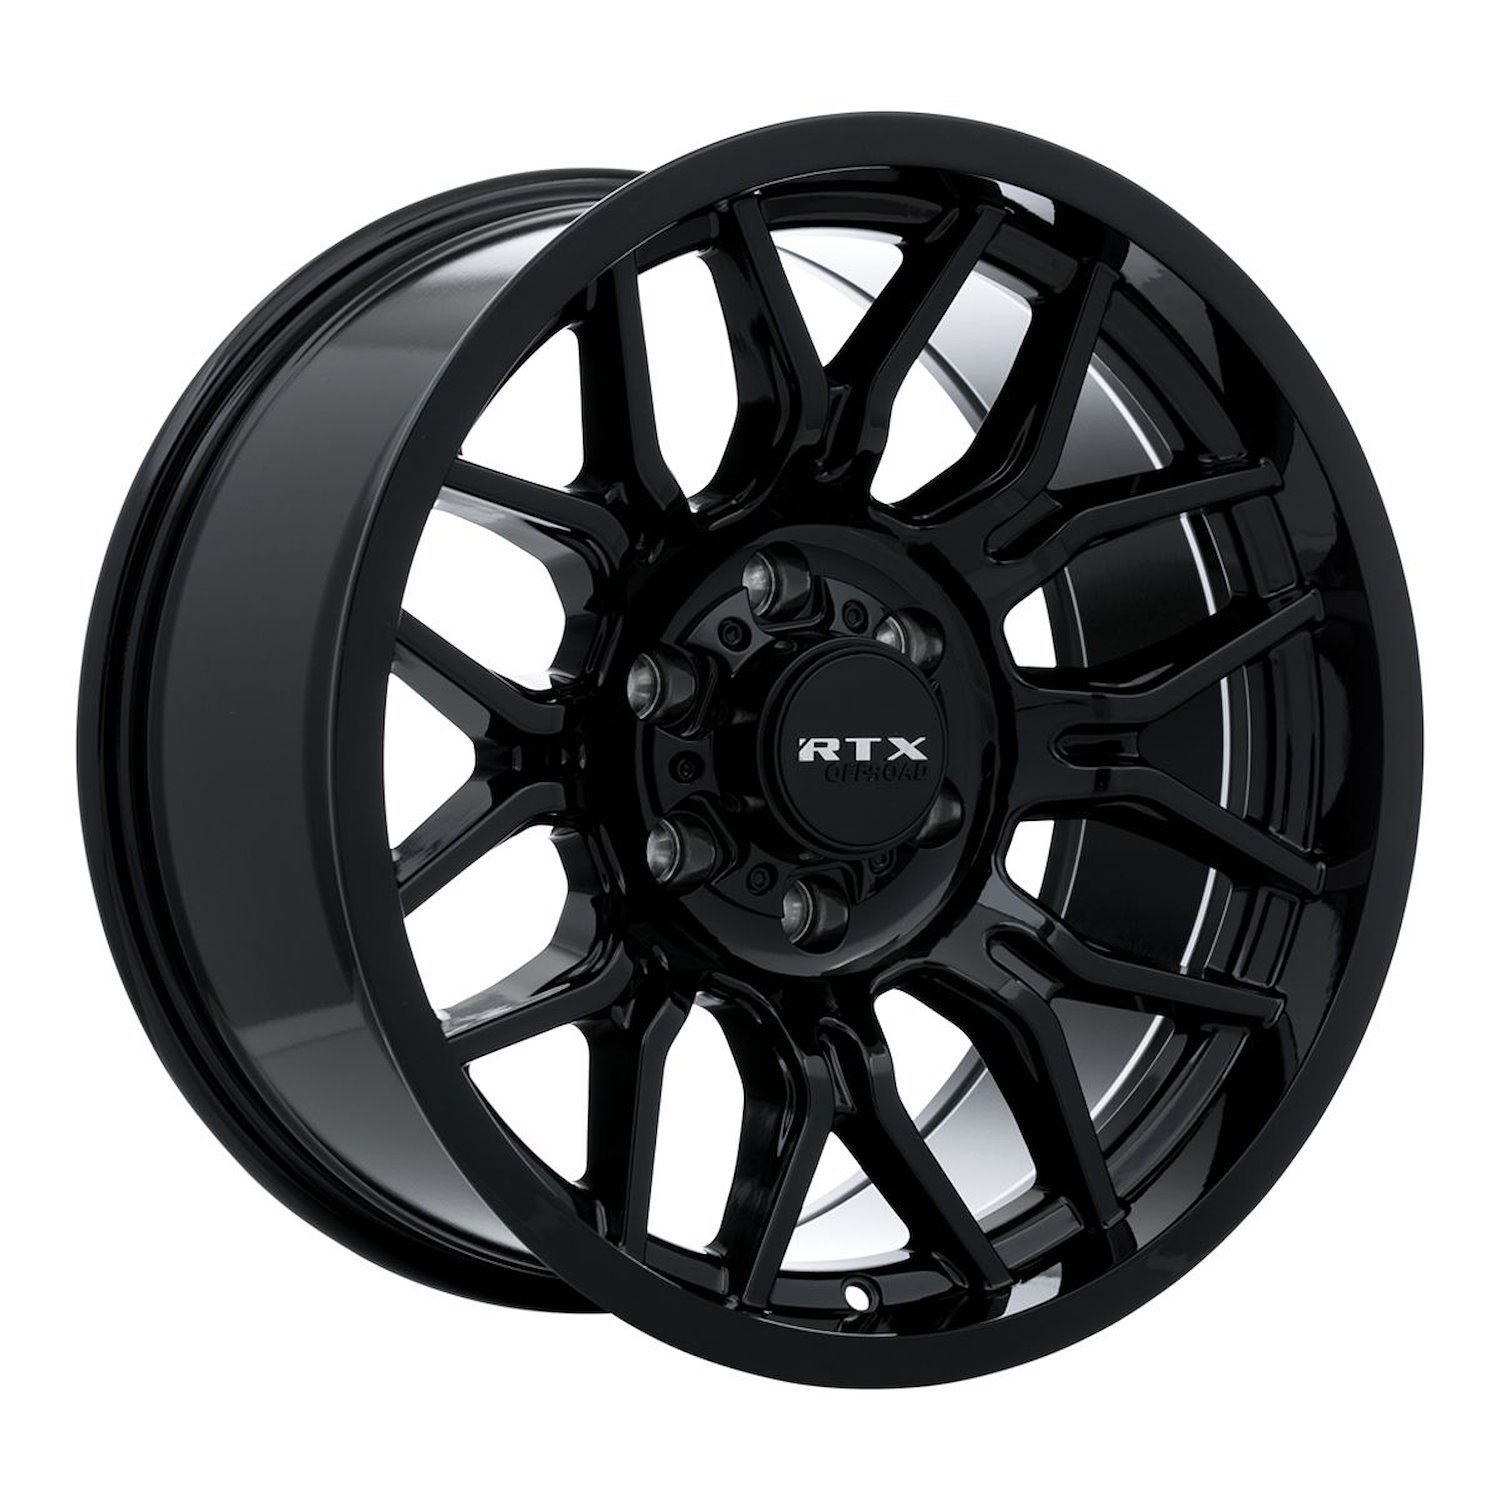 163755 Off-Road Series Claw Wheel [Size: 20" x 9"] Gloss Black Finish